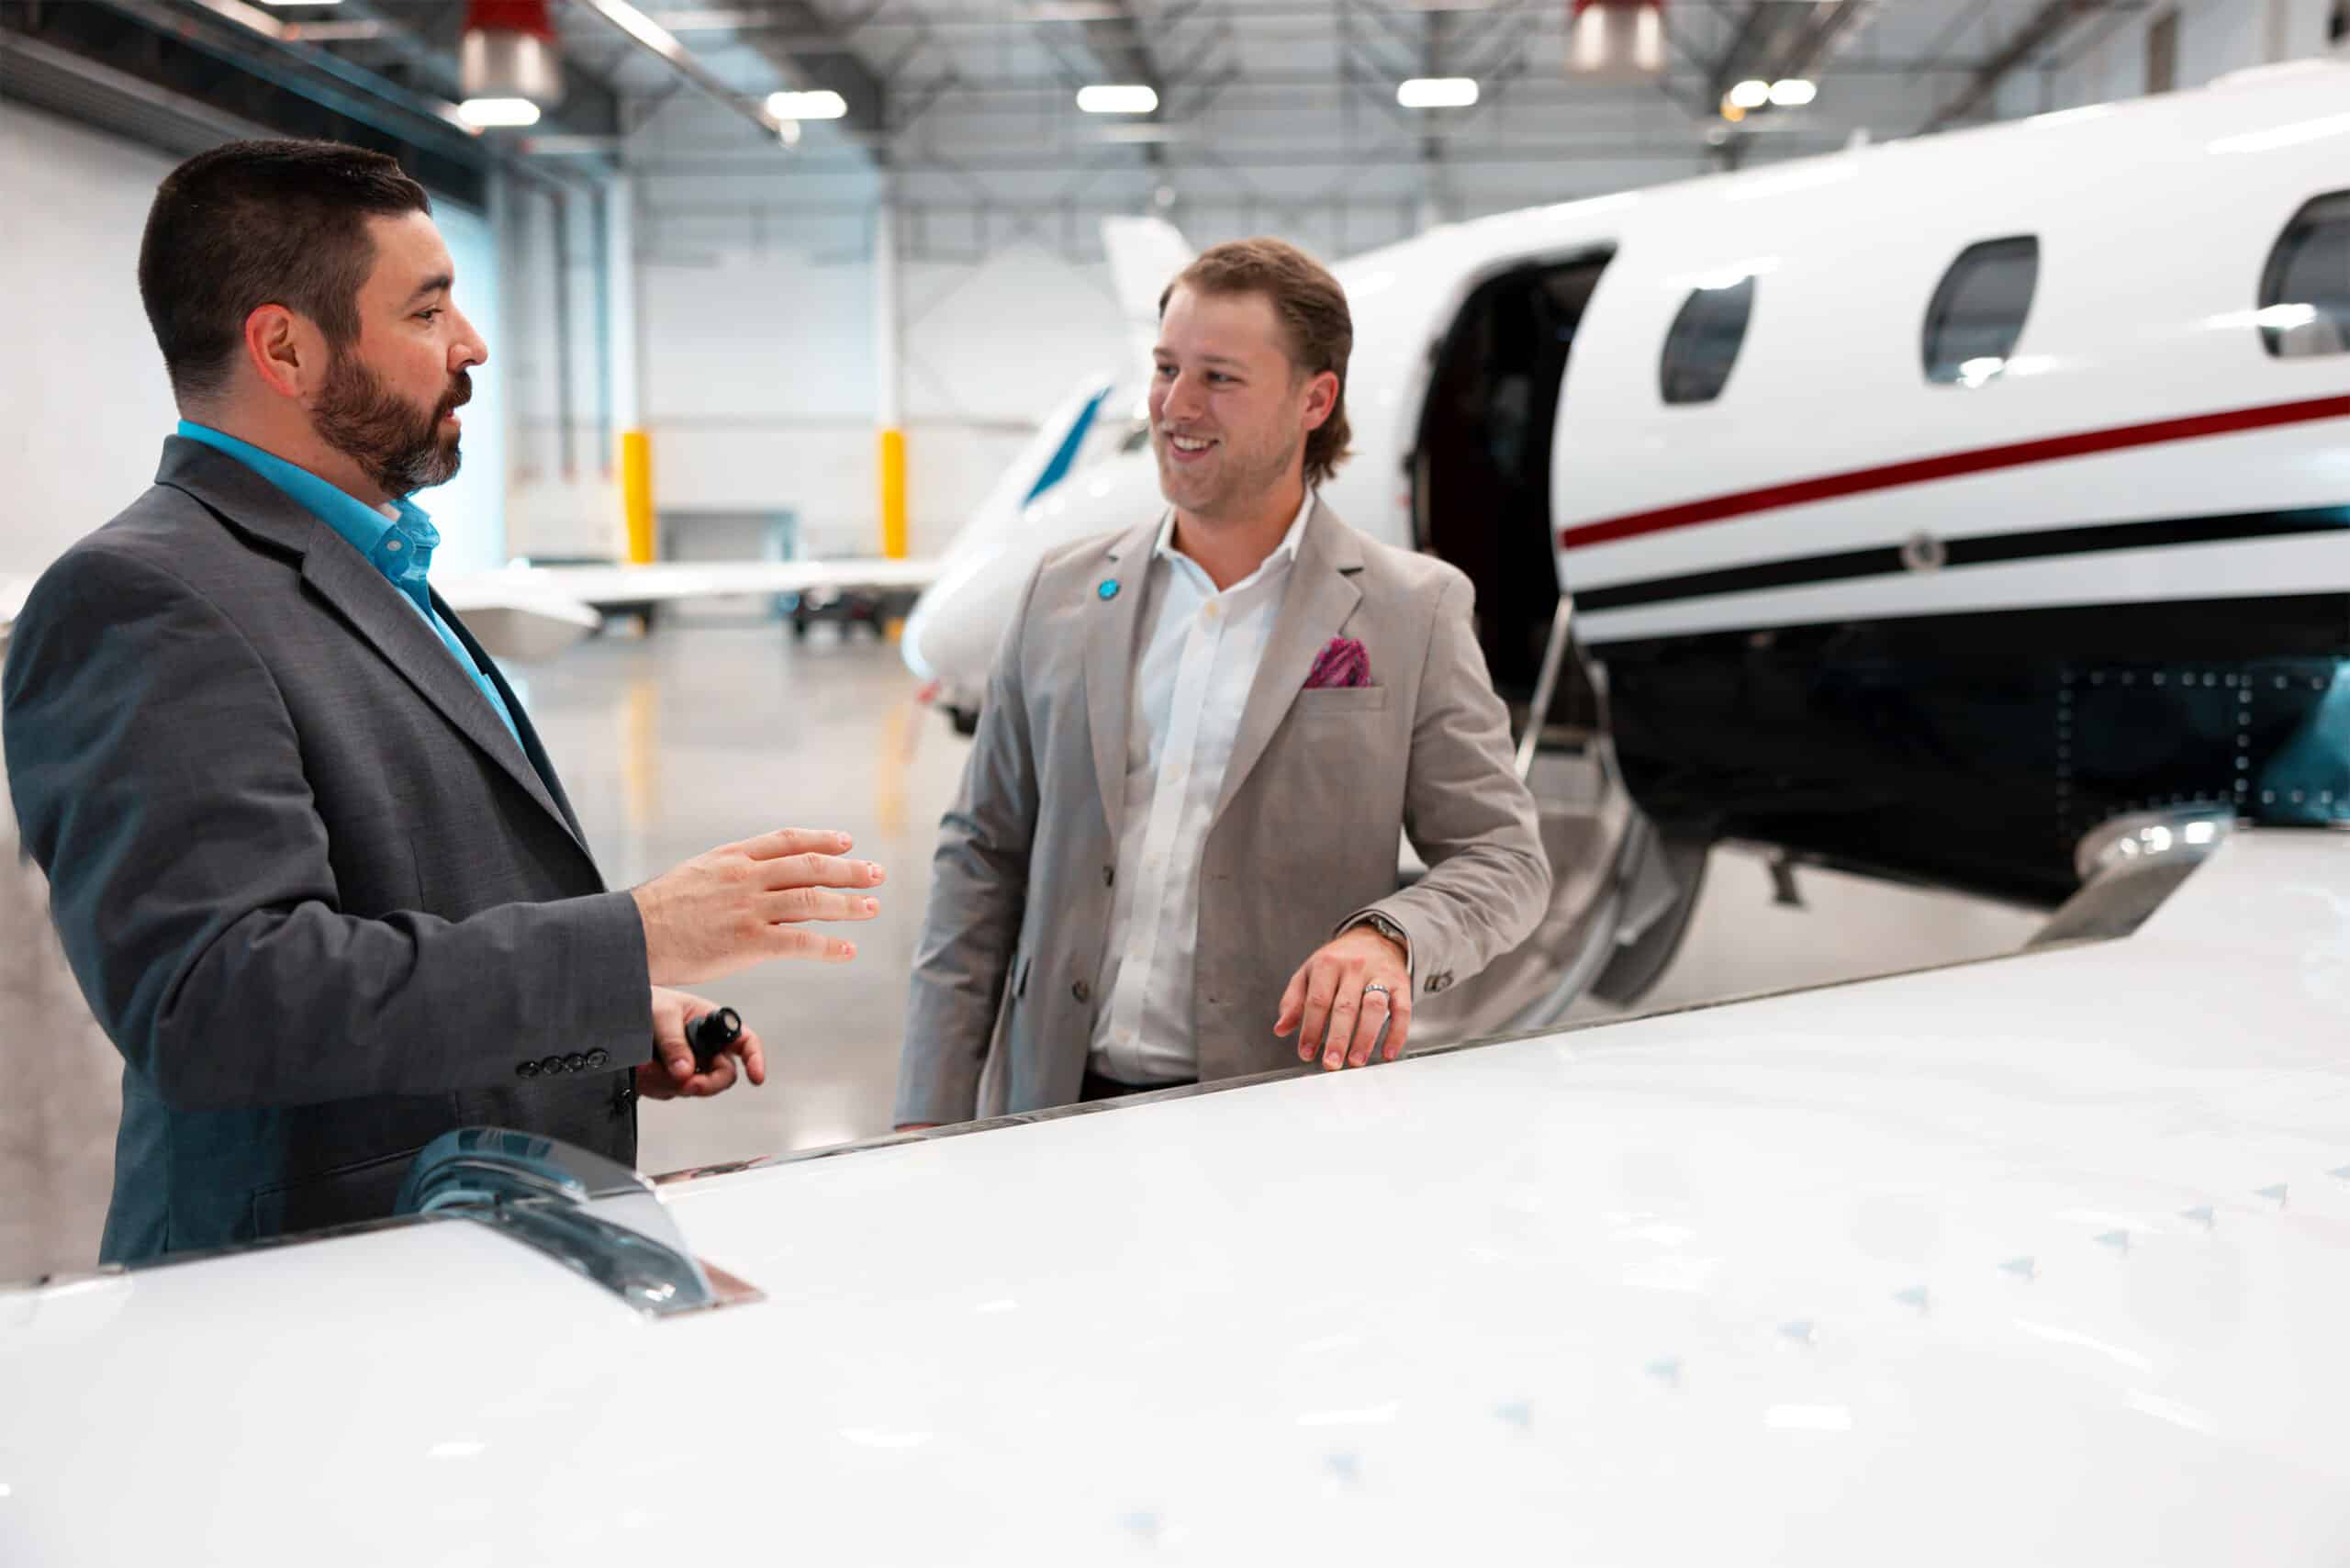 Young Professional in the Business Aviation Industry